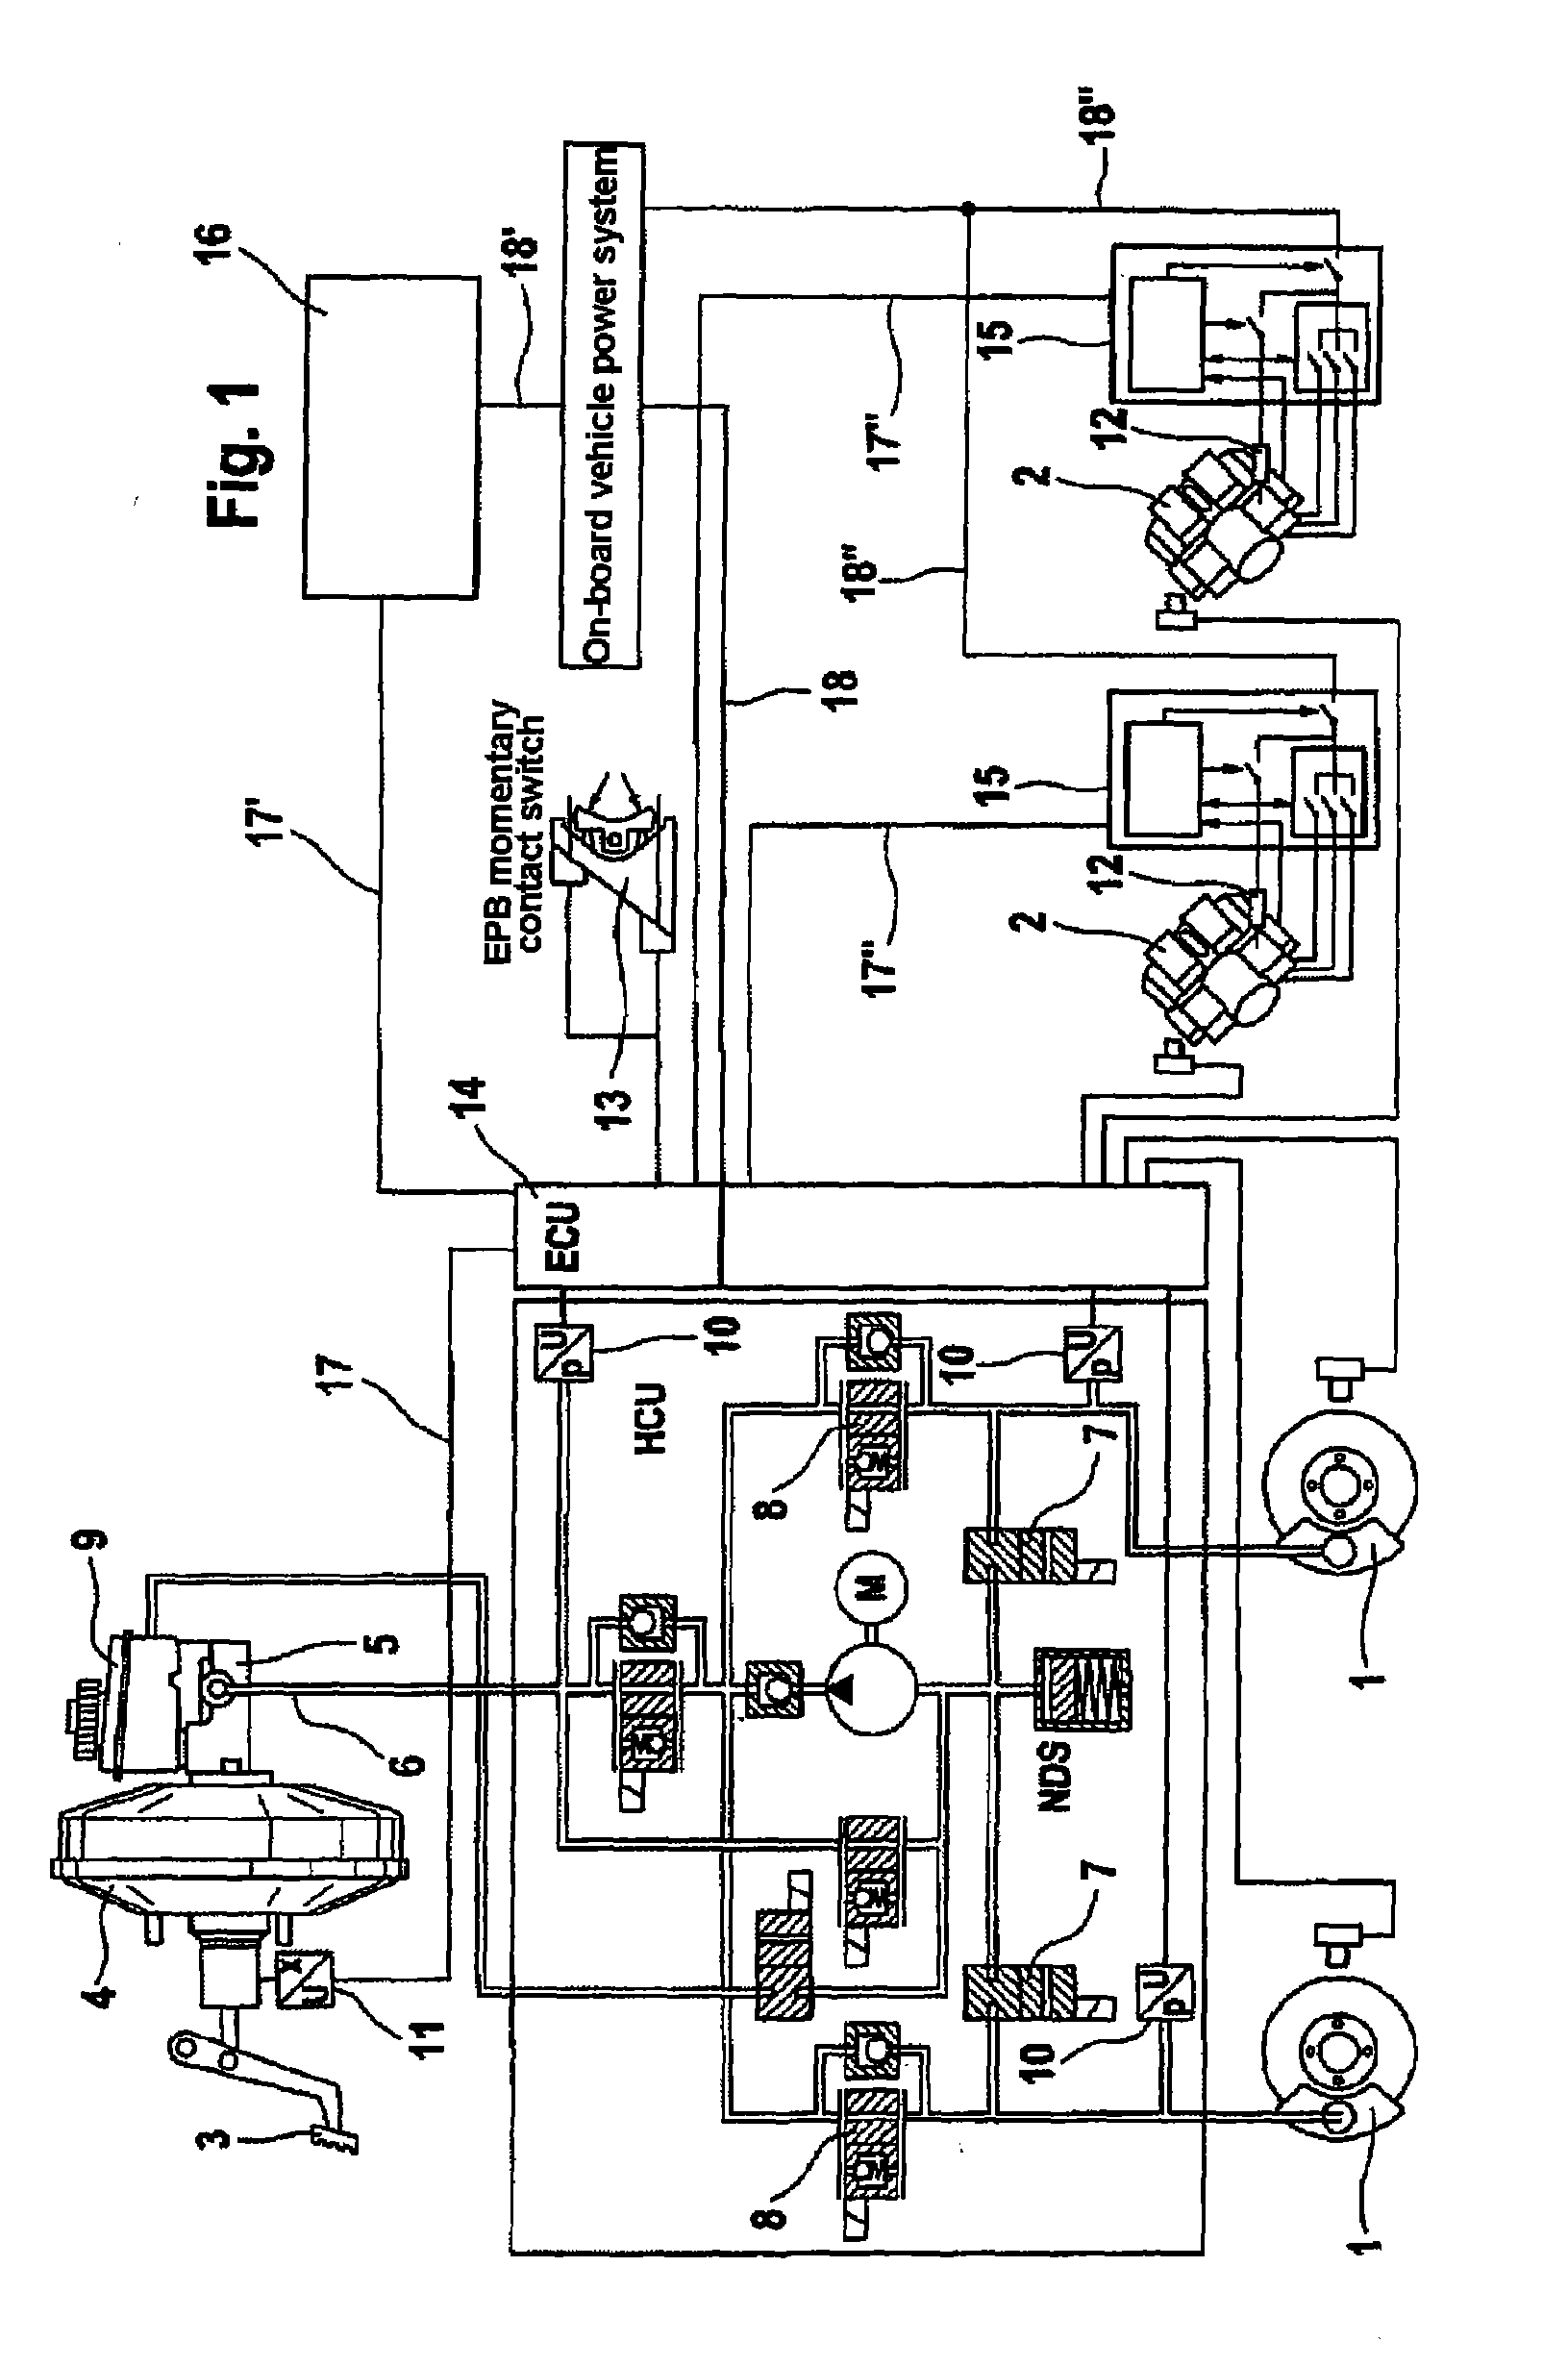 Device For Determining A Driving State and Method For The Driving-State-Dependent Operation Of A Combined Vehicle Brake System